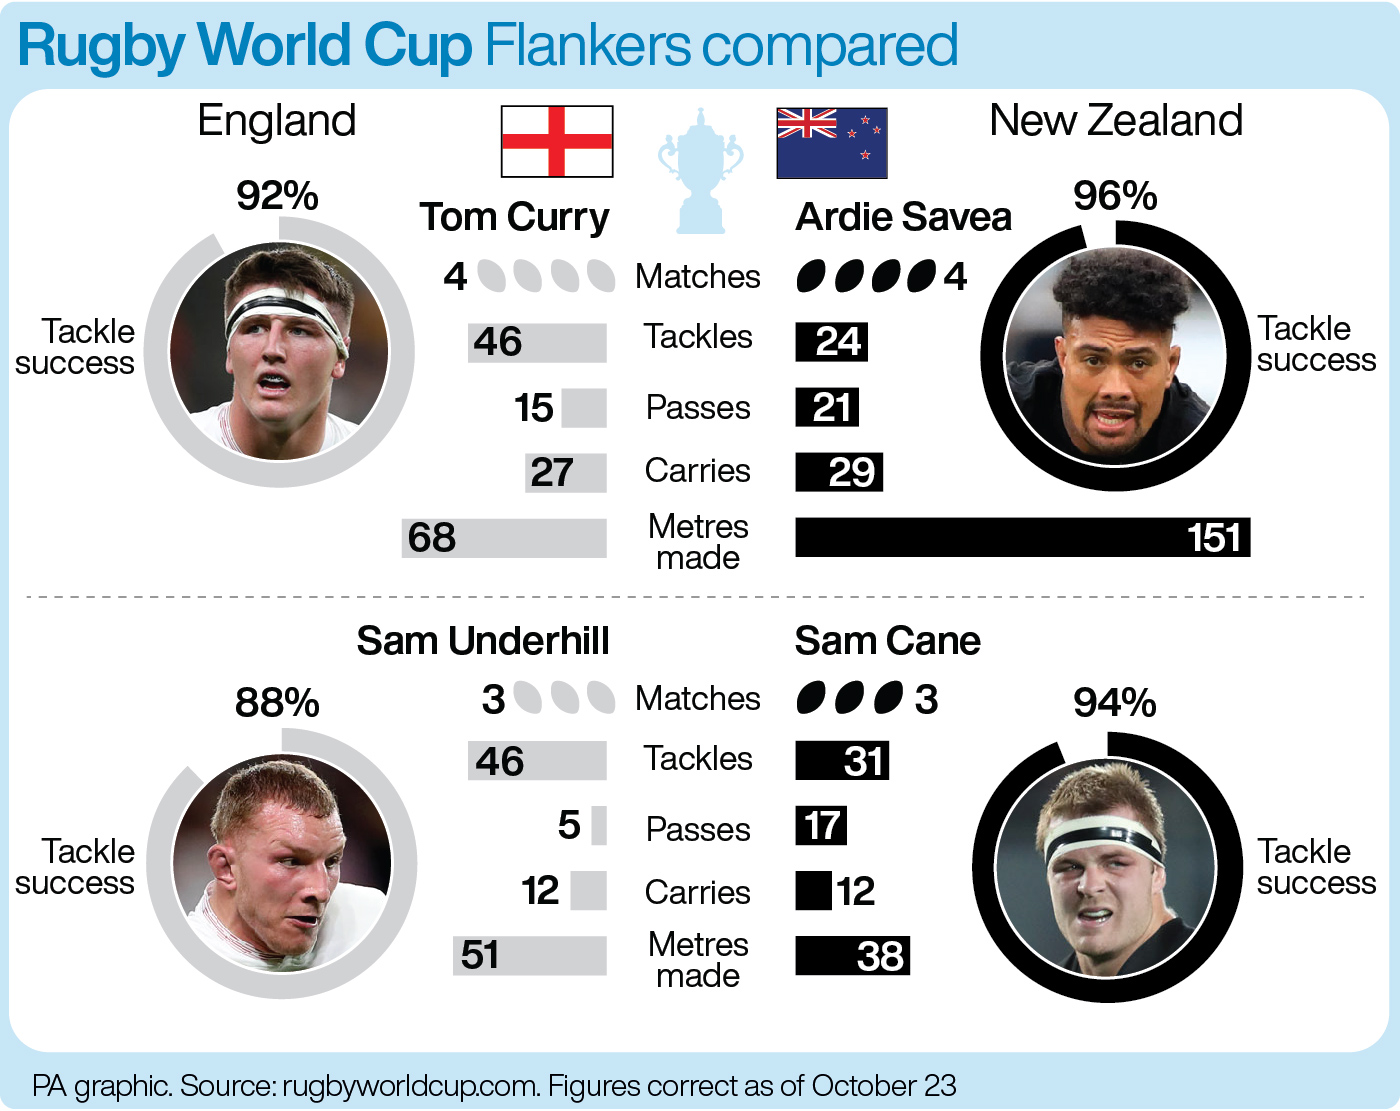 How England and New Zealand's flankers compare